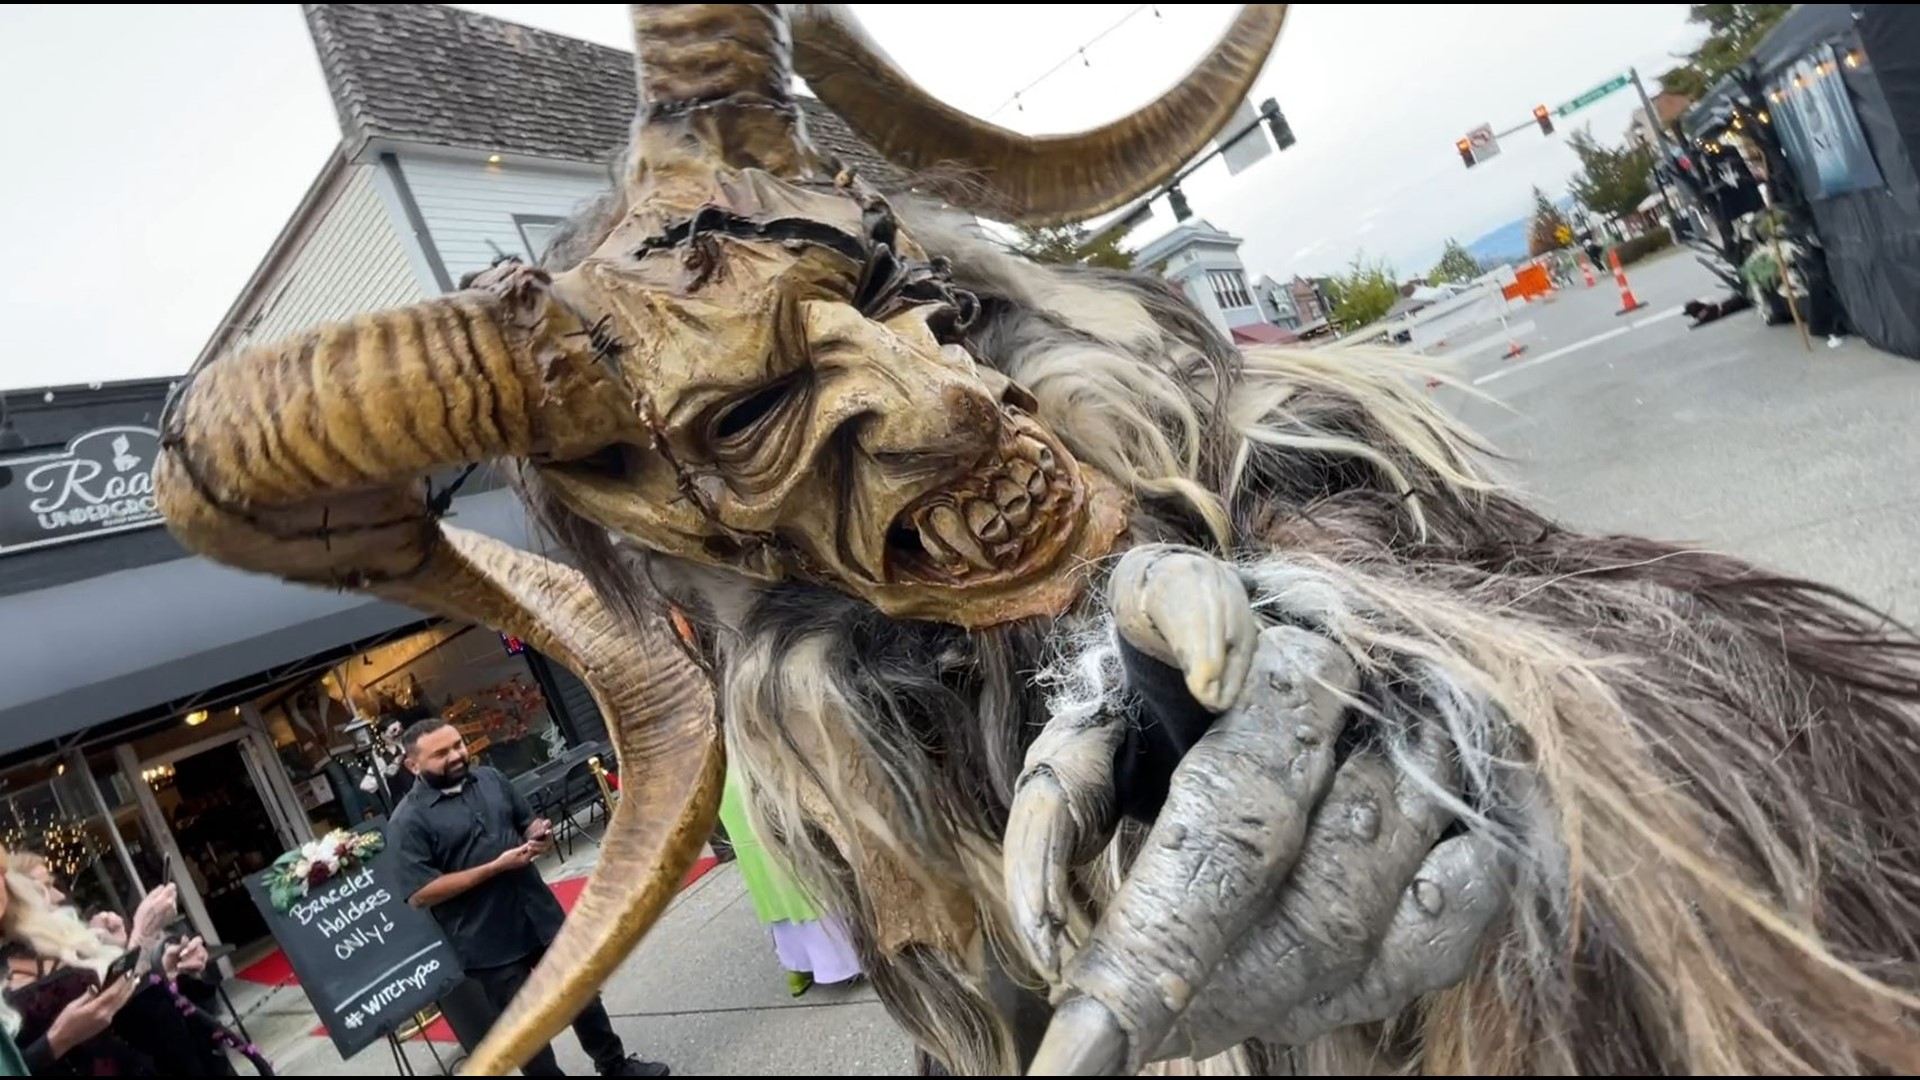 In European folklore Krampus is a character that steals away naughty children during the holidays. He's never been more popular in the Northwest. #k5evening